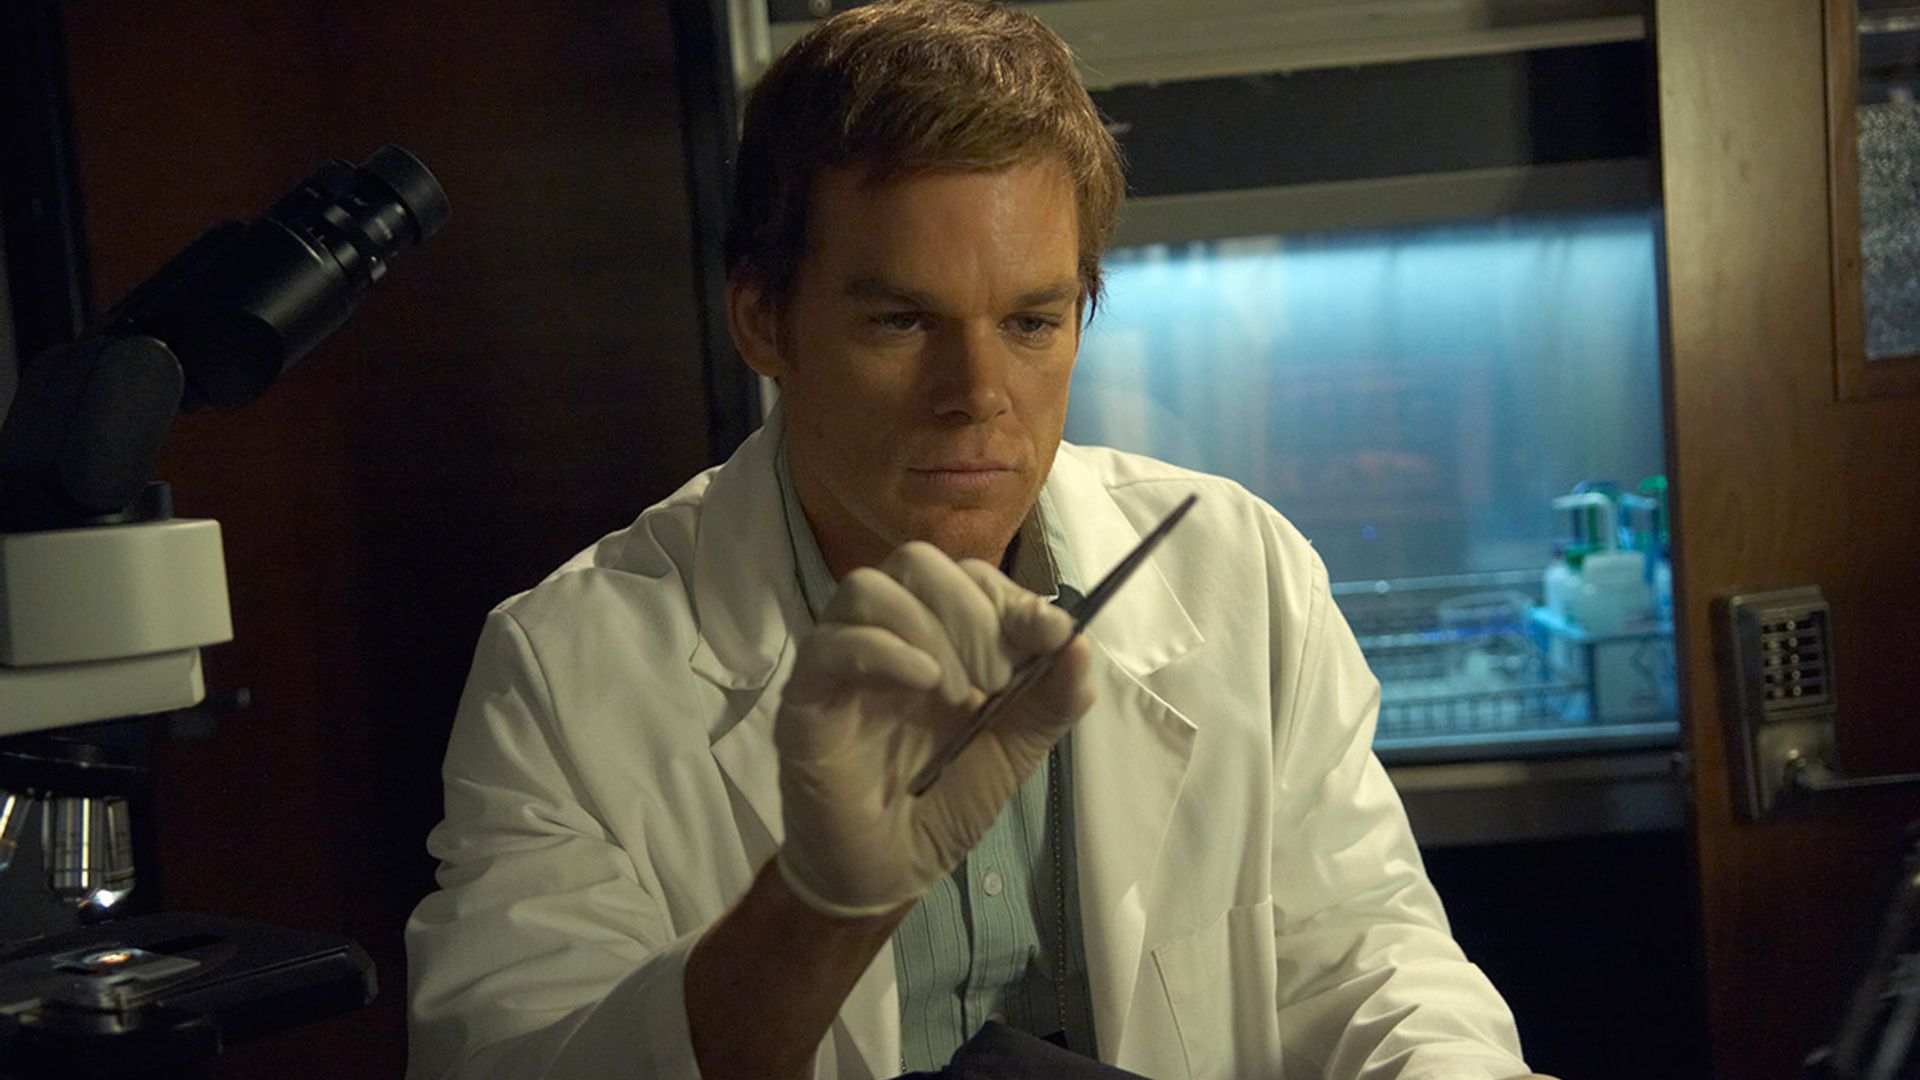 Dexter star reveals how the new series will have major change HELLO!